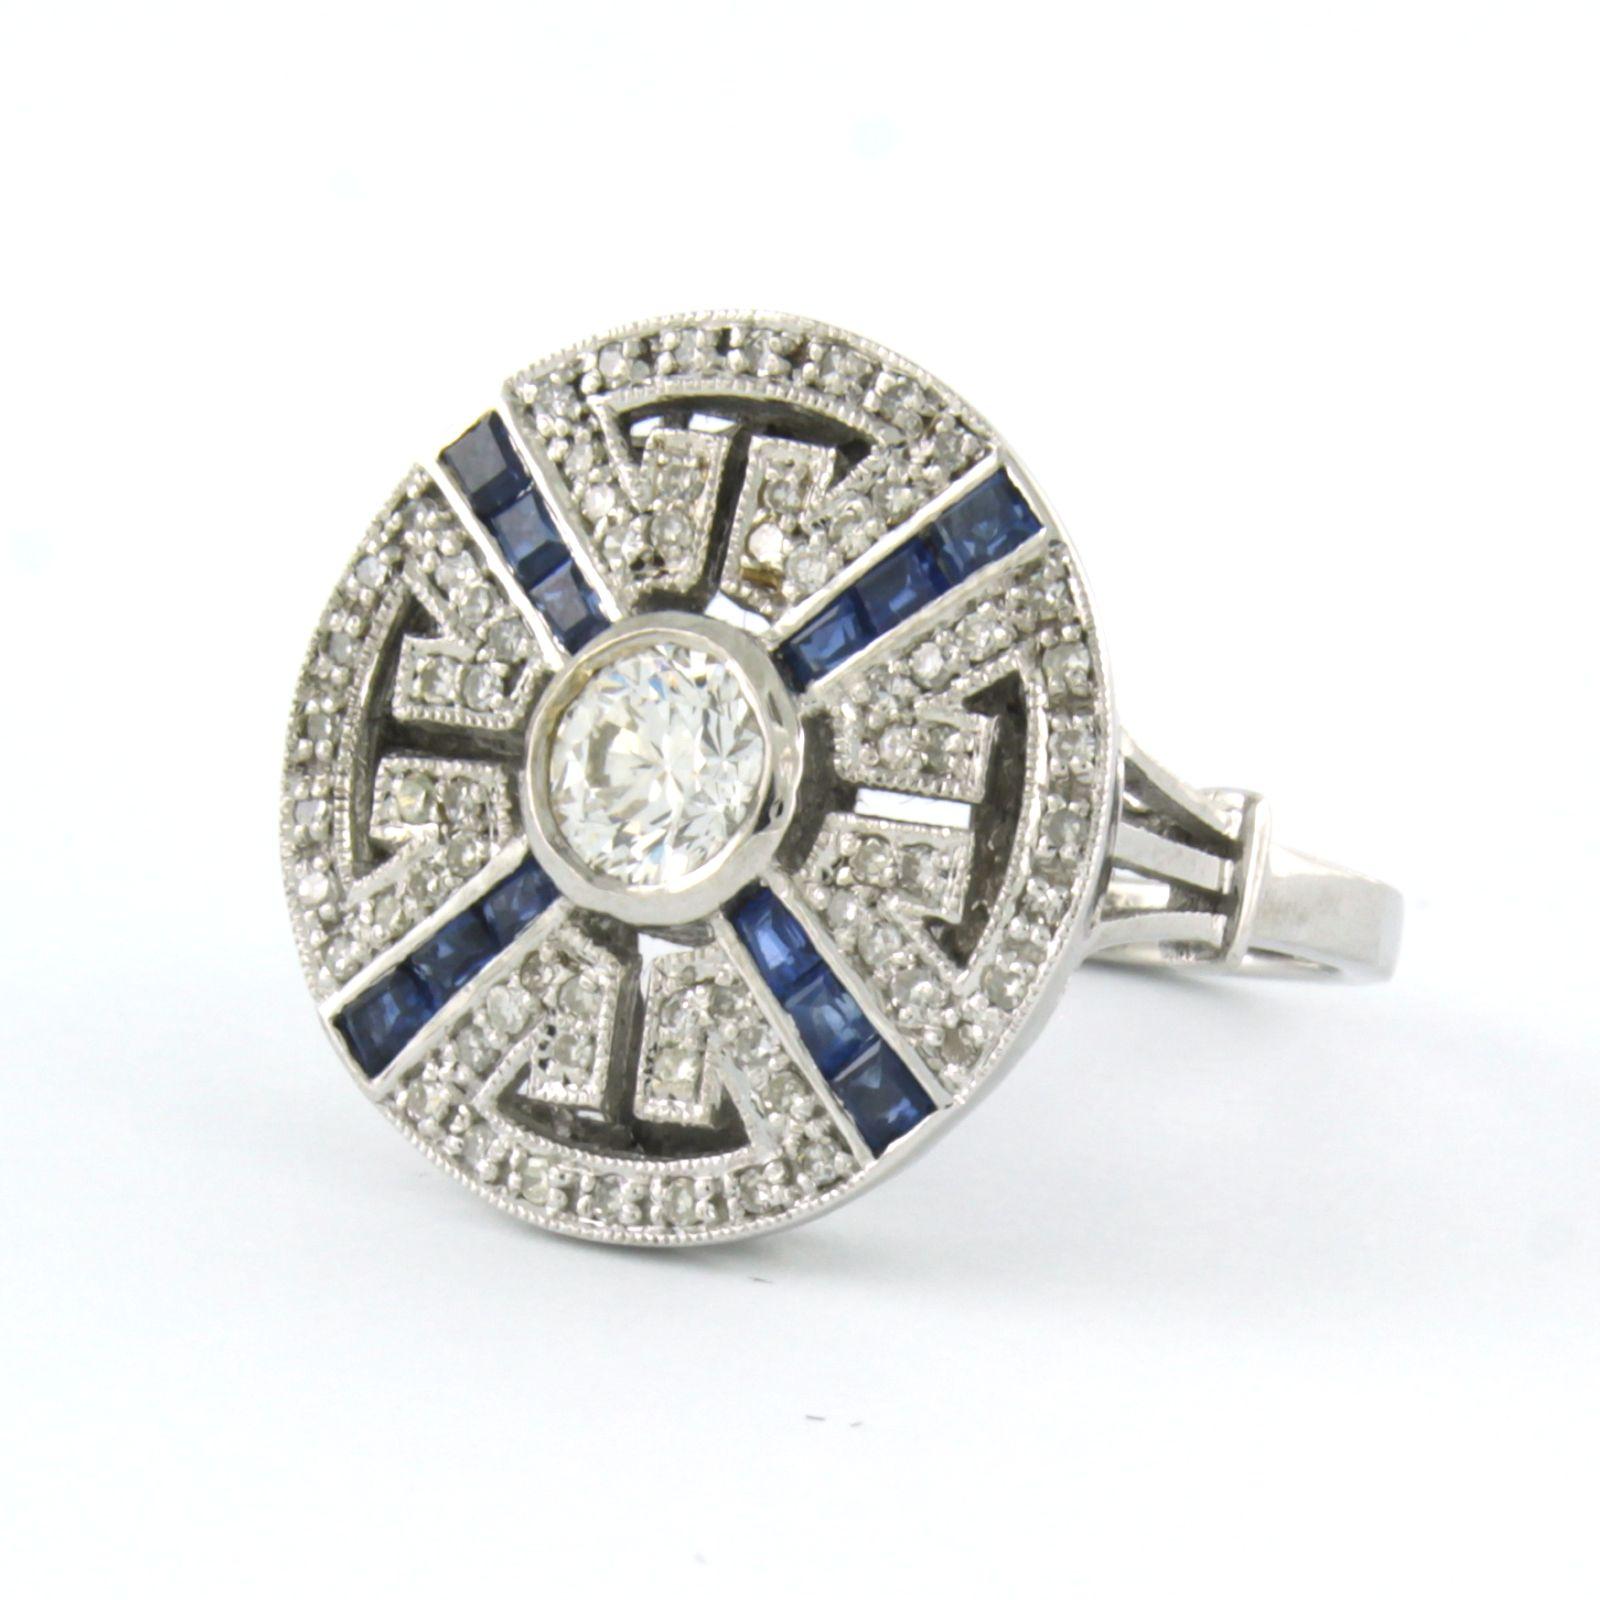 Modern Art Deco style Ring with sapphire and diamond 14k white gold